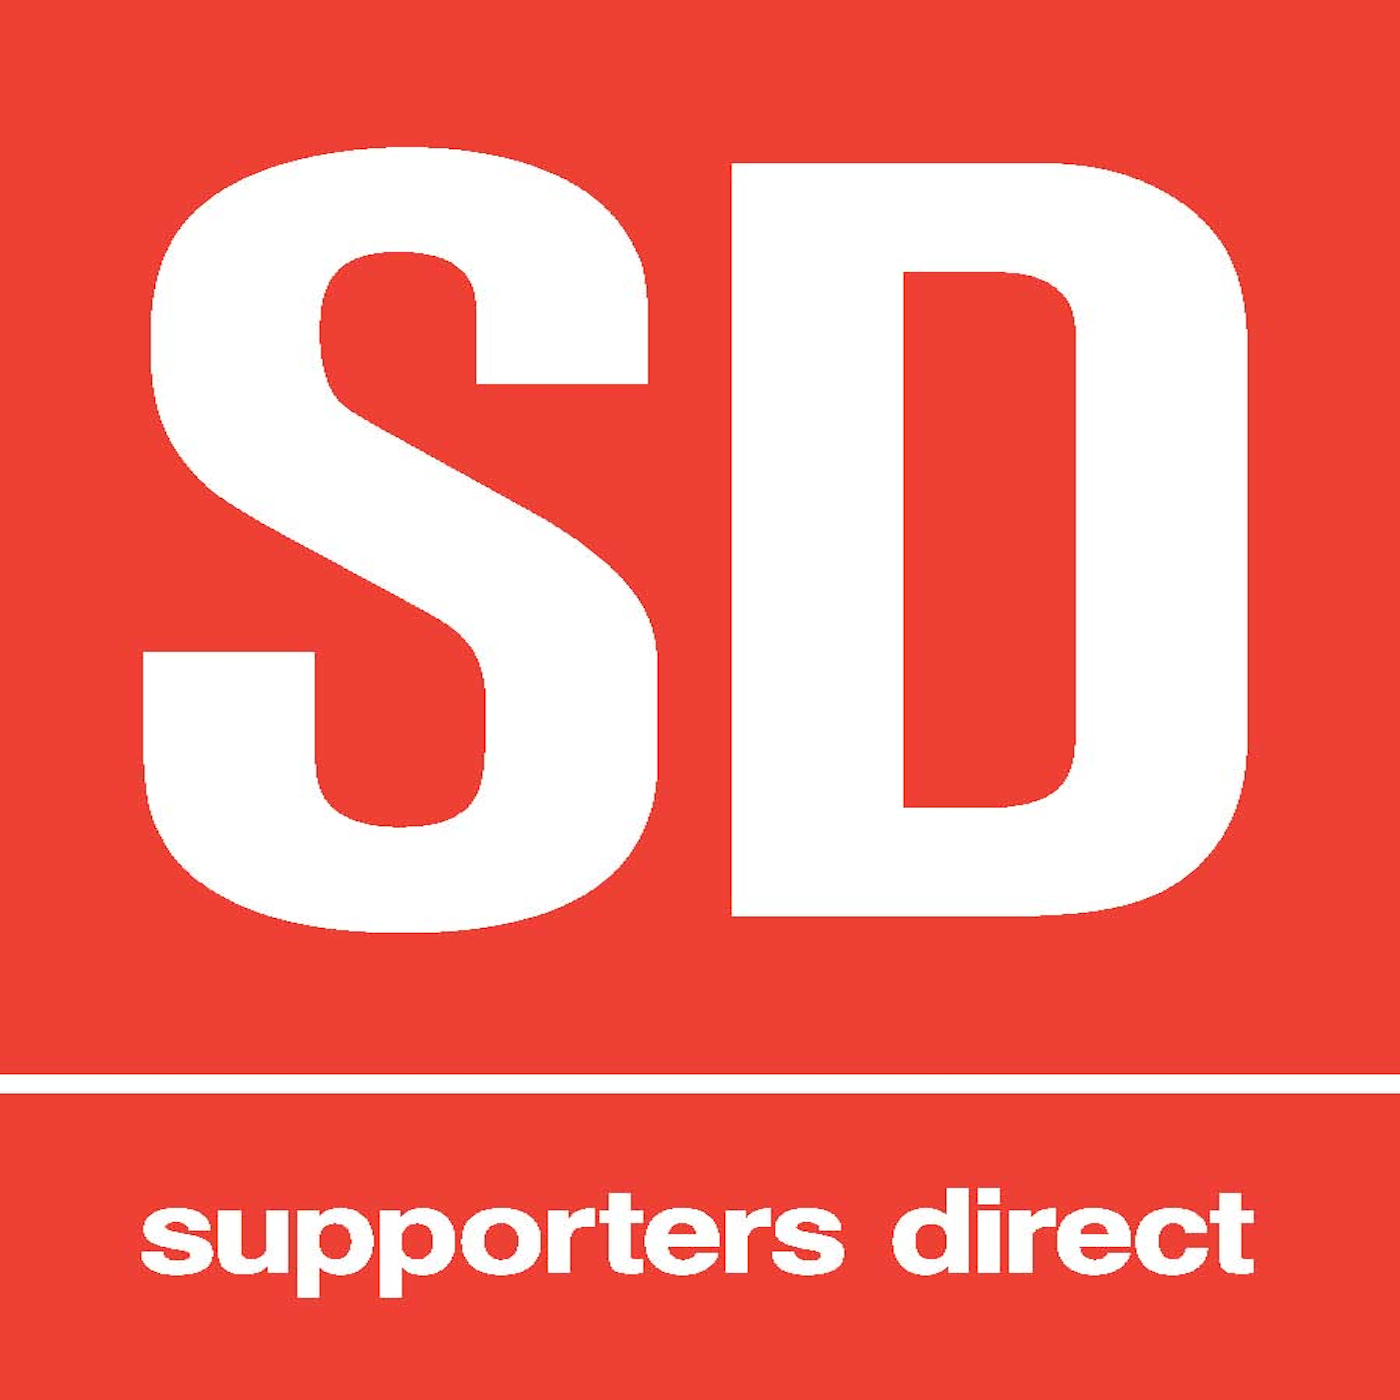 Direct support. Directions Podcast.